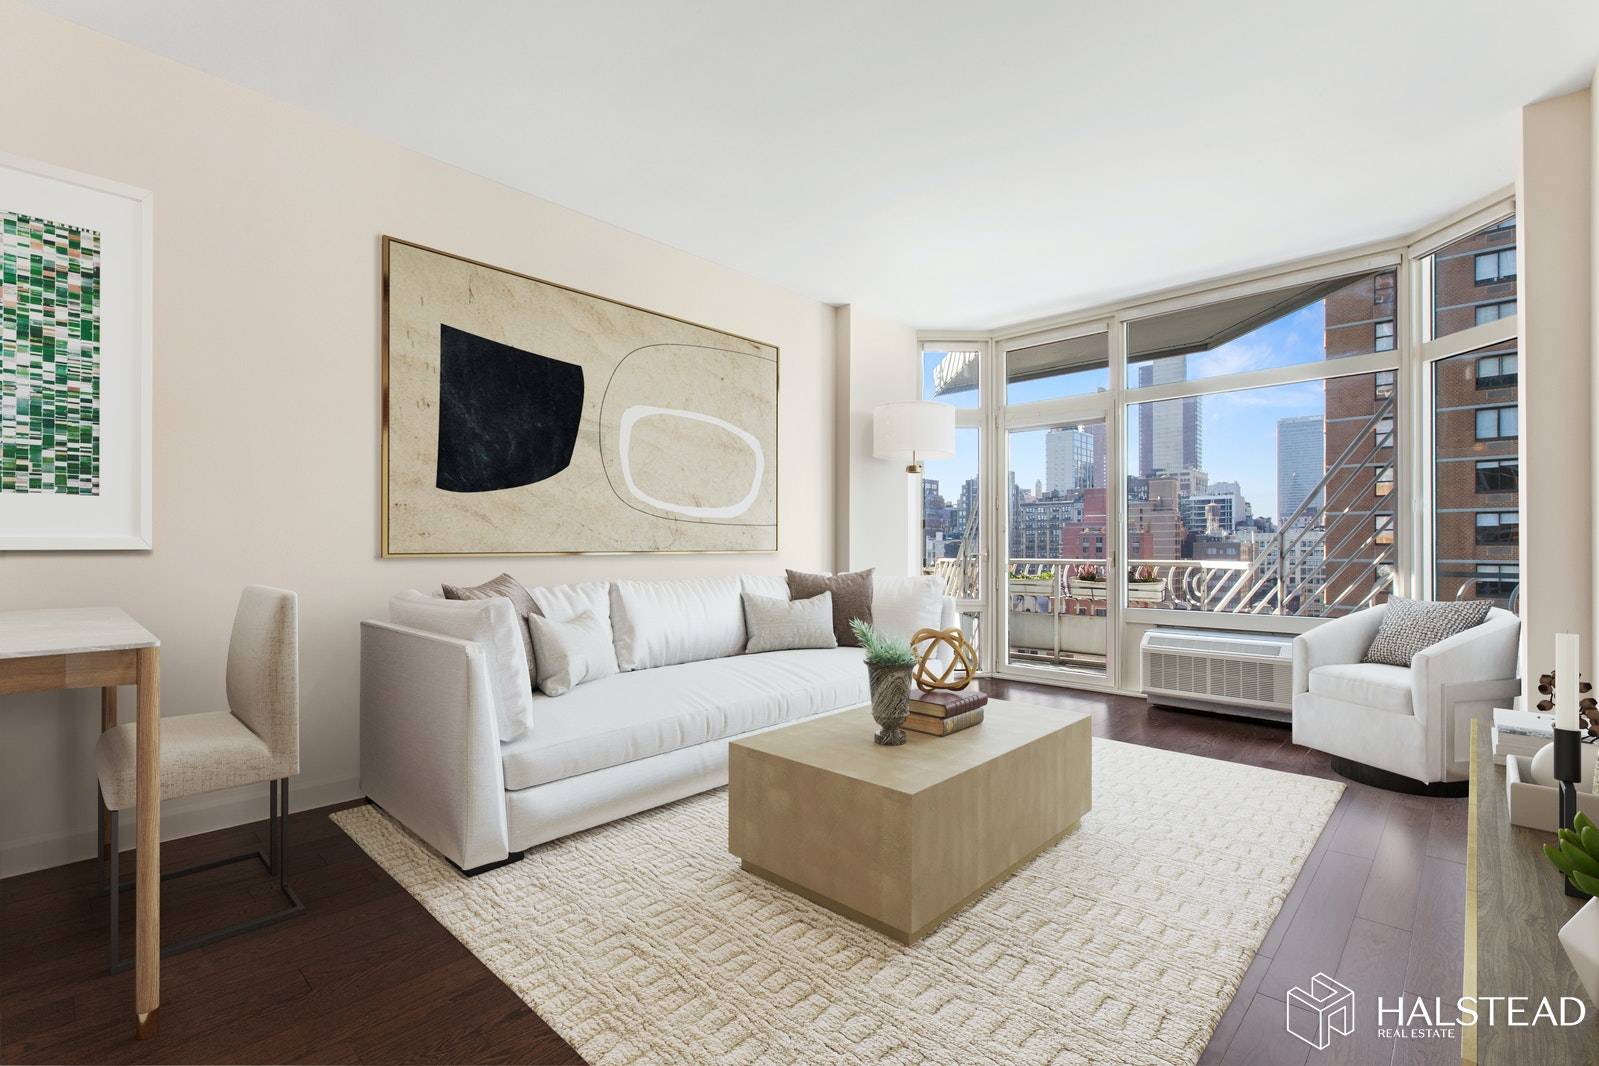 NO FEE MODERN two bedroom two bathroom apartment with a PRIVATE BALCONY and OPEN CITY VIEWS at The Future Condominium in Kips Bay.